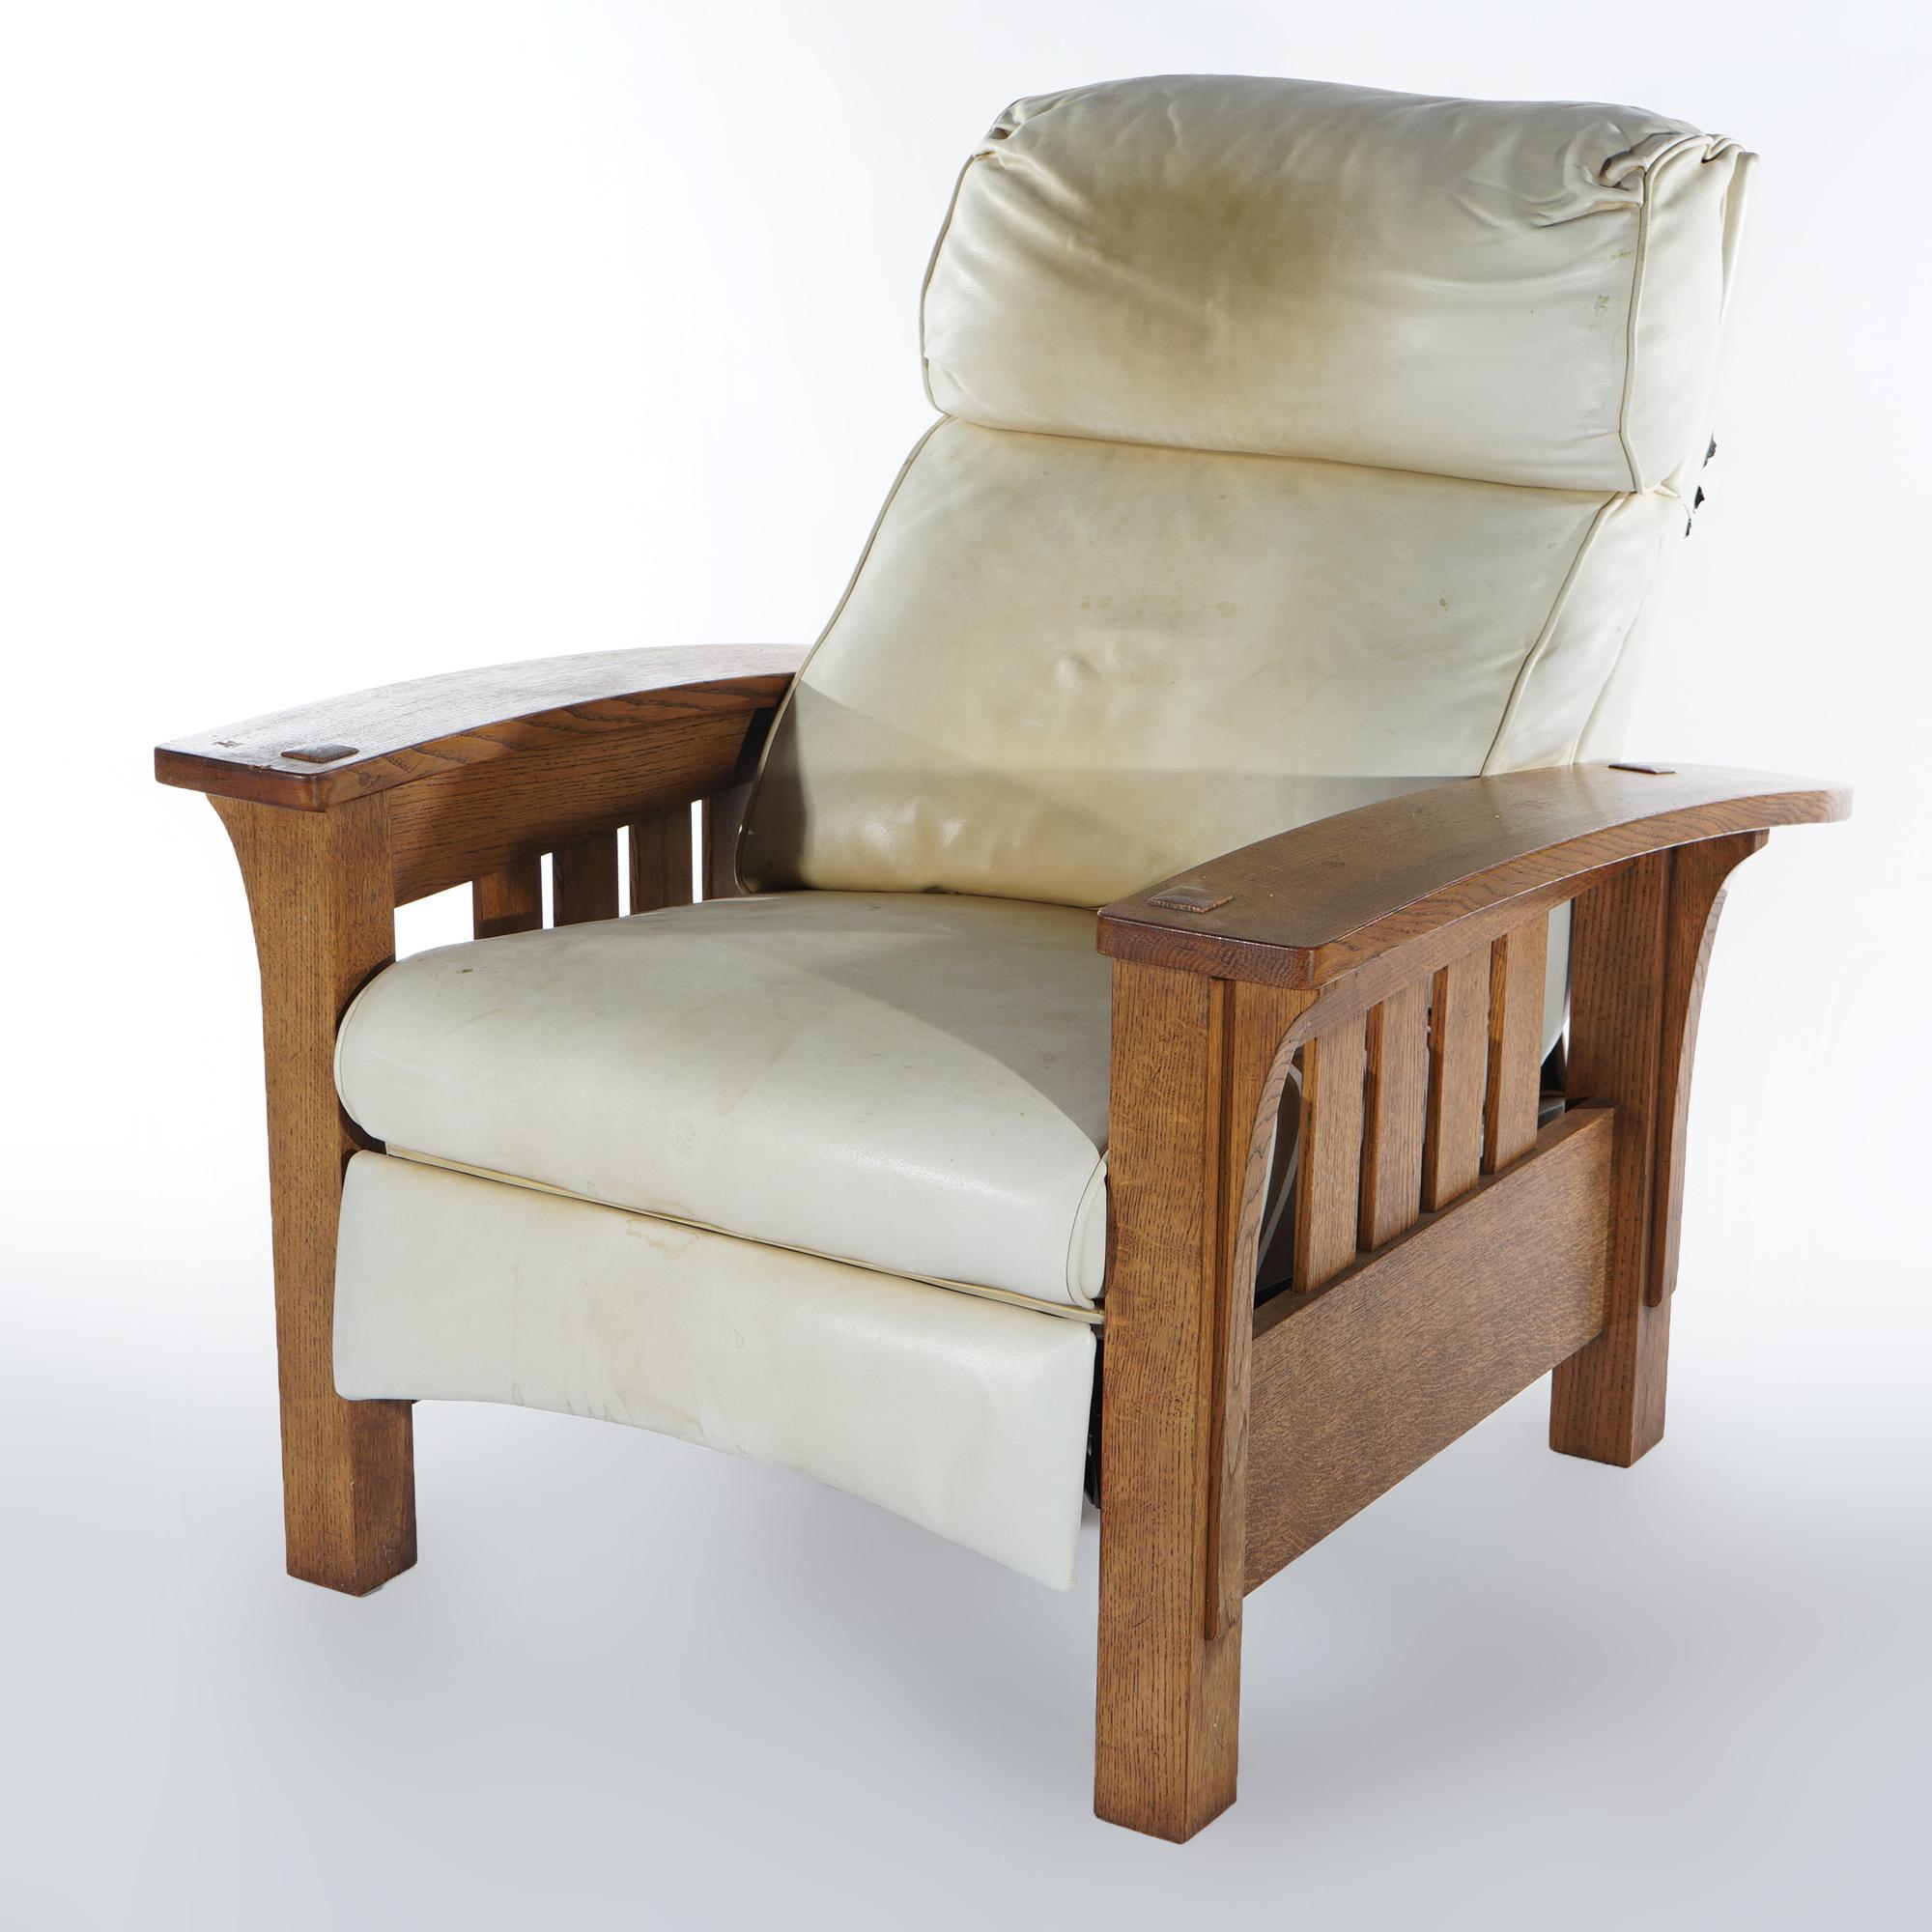 An Arts & Crafts Mission style recliner offers oak frame in Morris chair form with slat sides, 20th century

Measures - 36.5